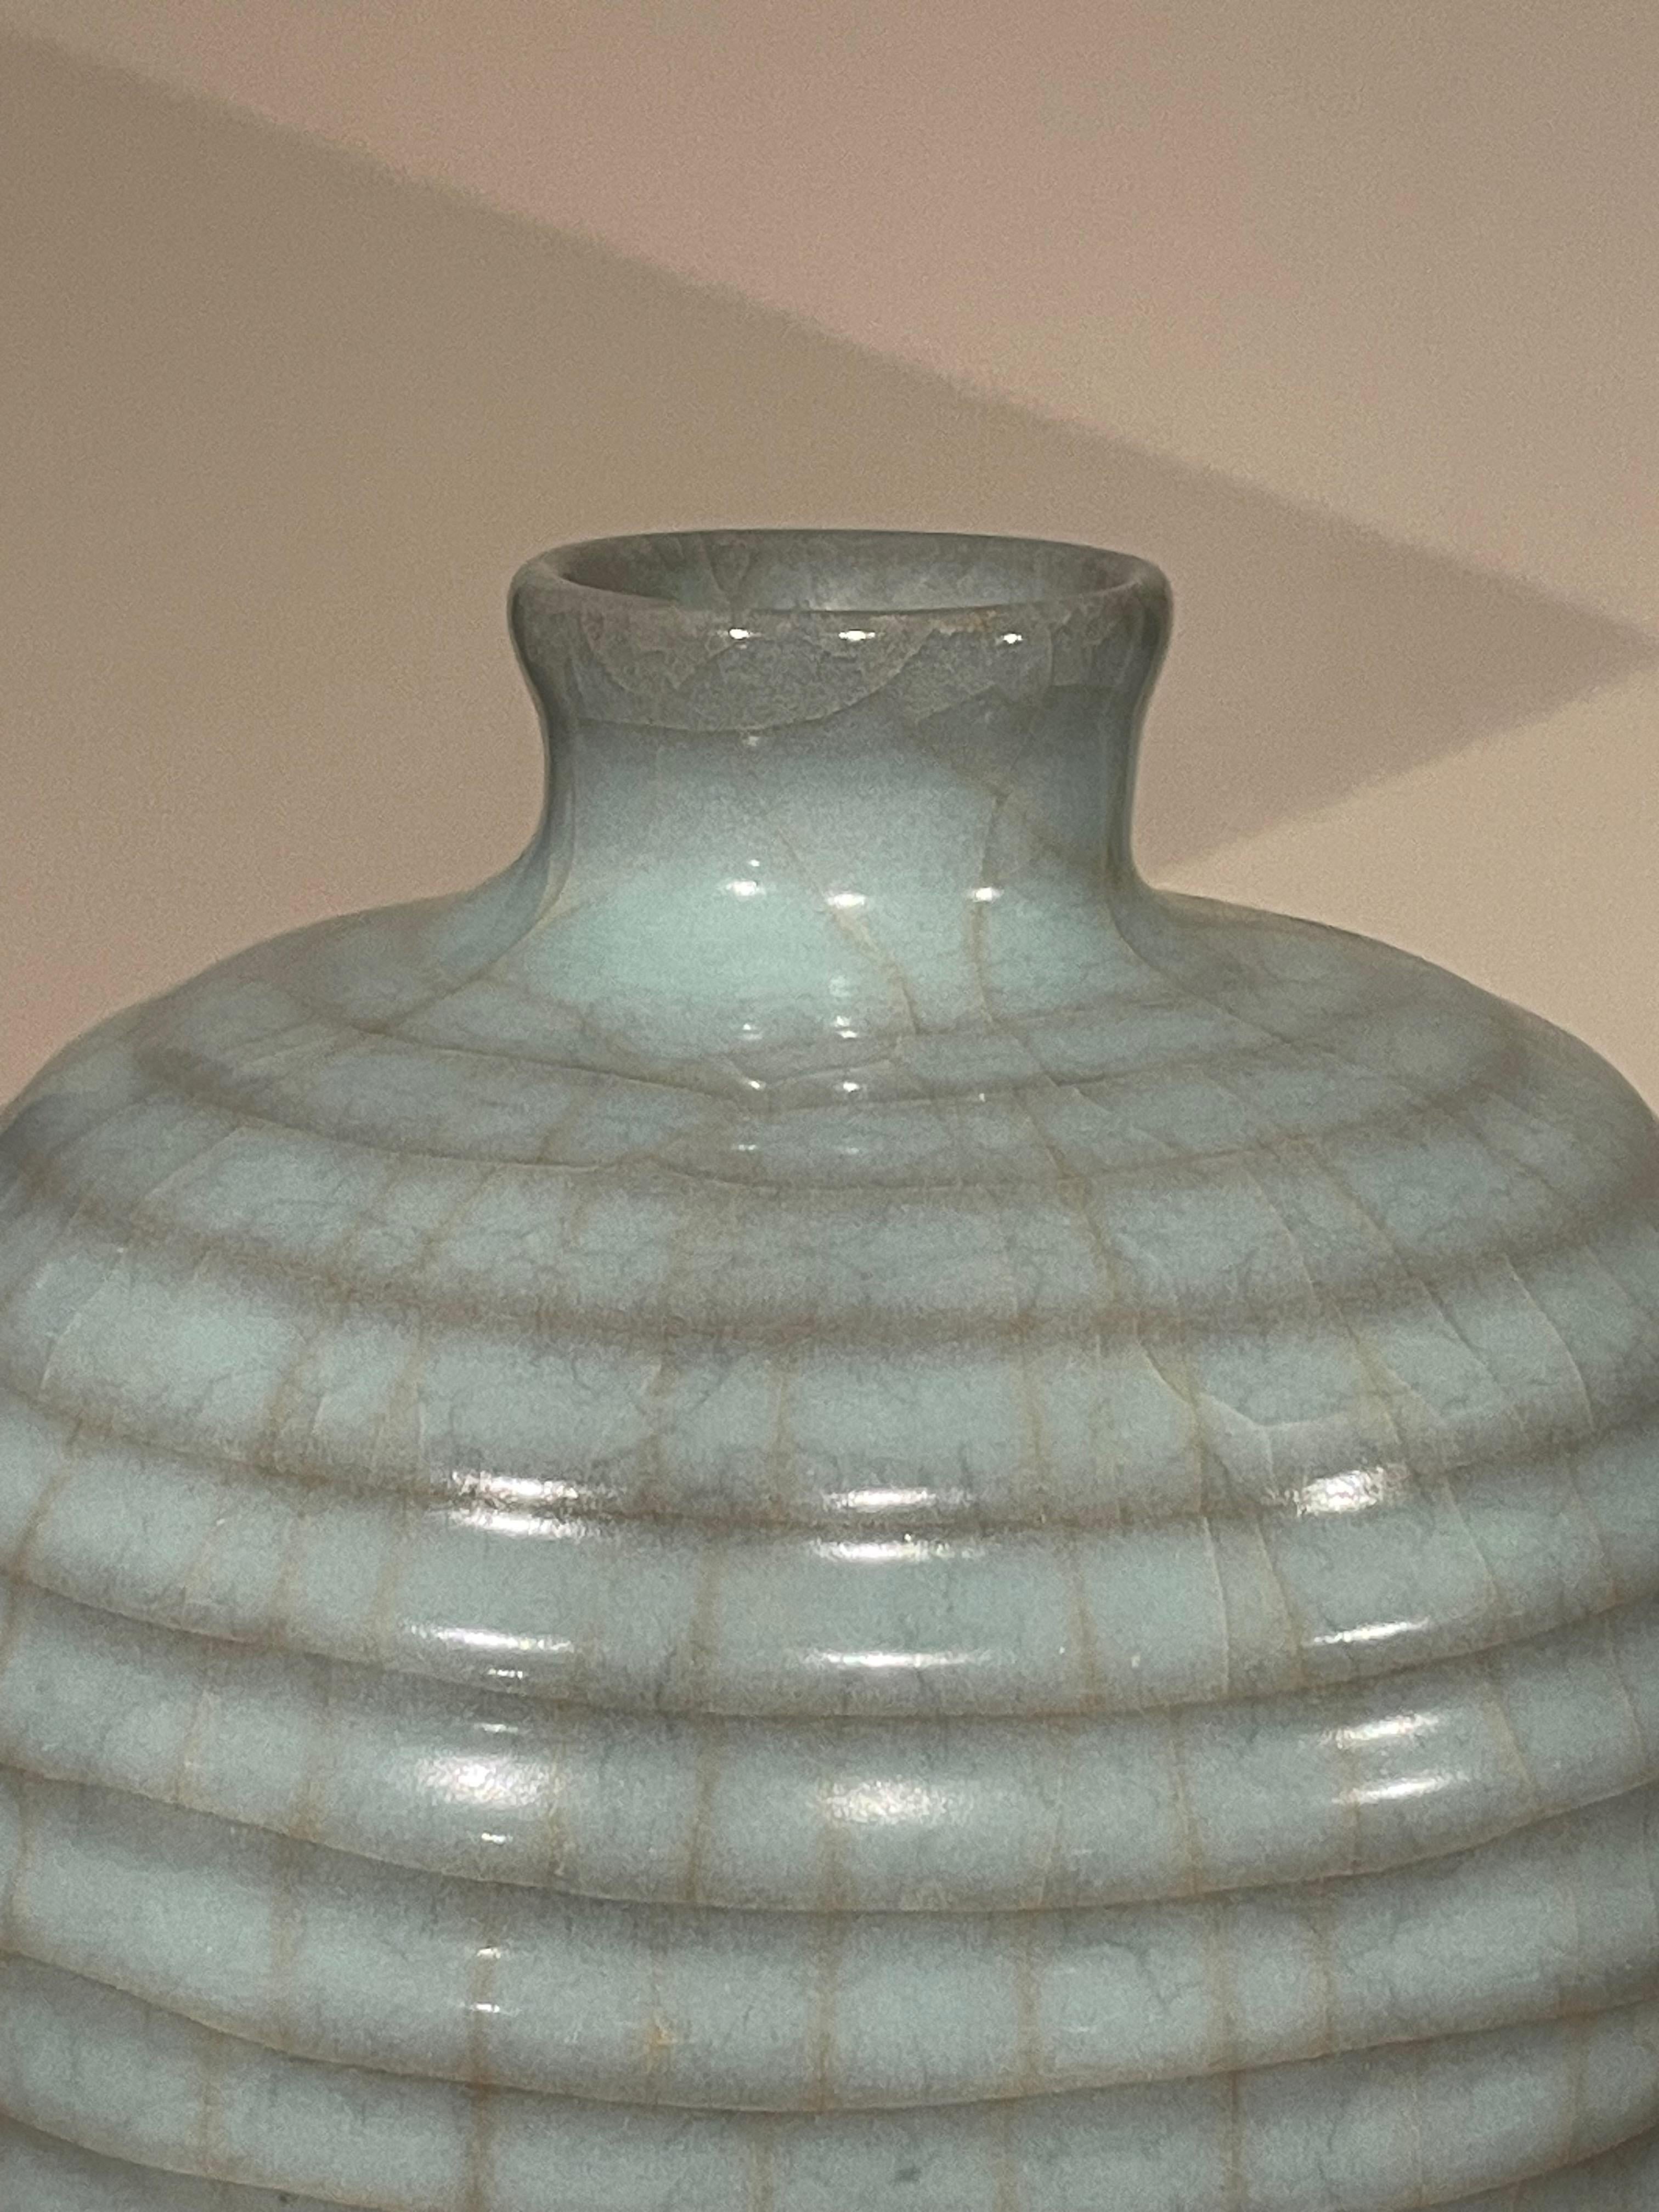 Contemporary Chinese pale turquoise vase.
Horizontal rib design.
Large collection available with varying sizes and shapes.
